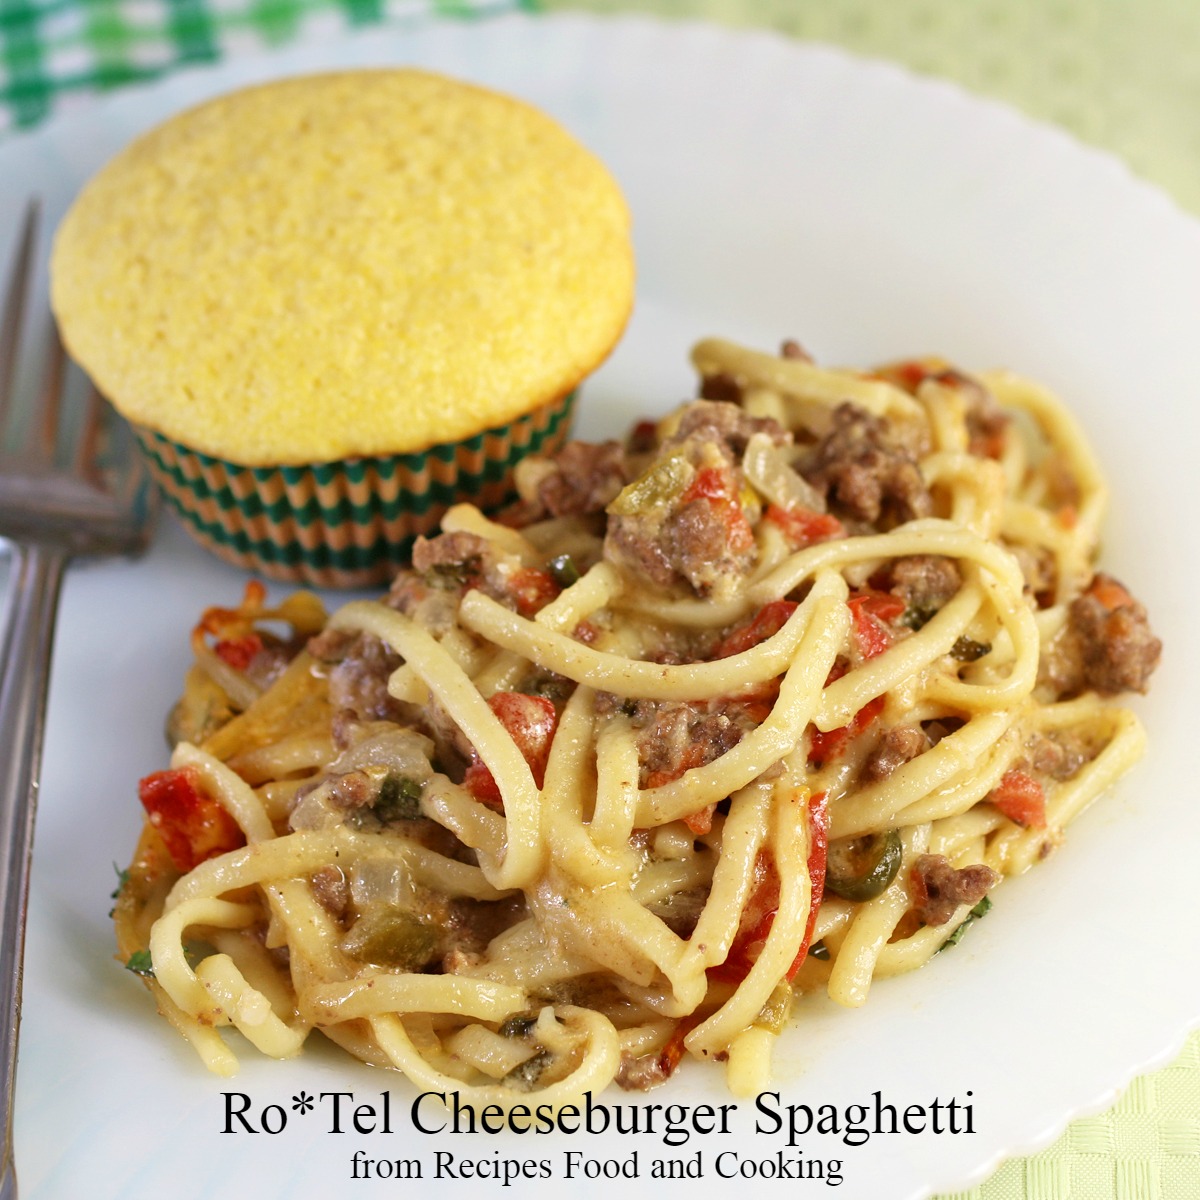 Ro Tel Cheeseburger Spaghetti Recipes Food And Cooking,Easy Printable Crossword Puzzles Pdf